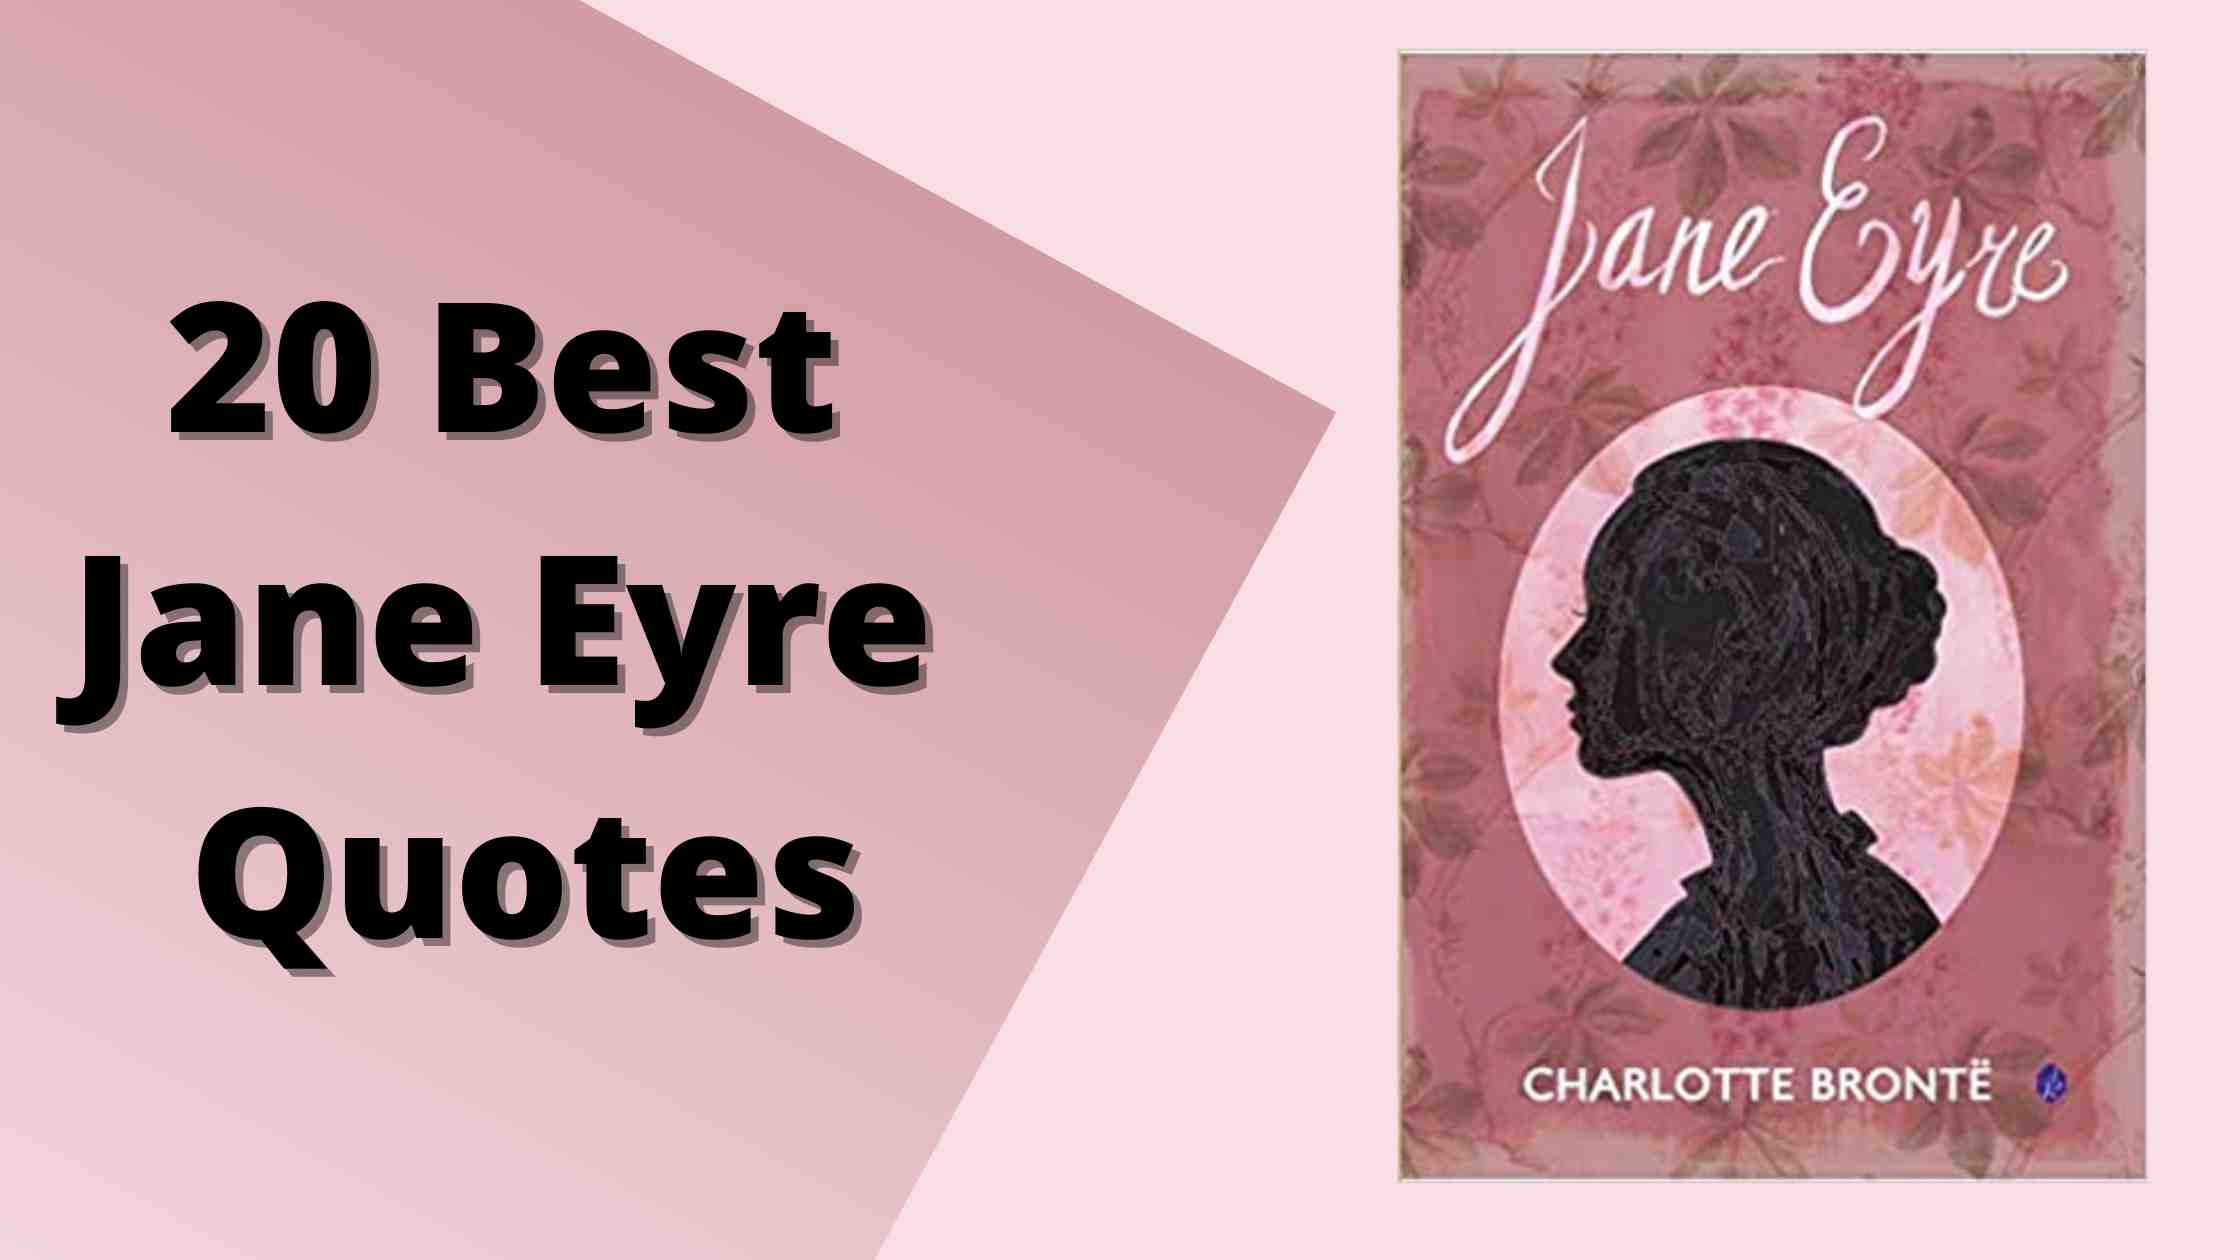 jane eyre education quotes